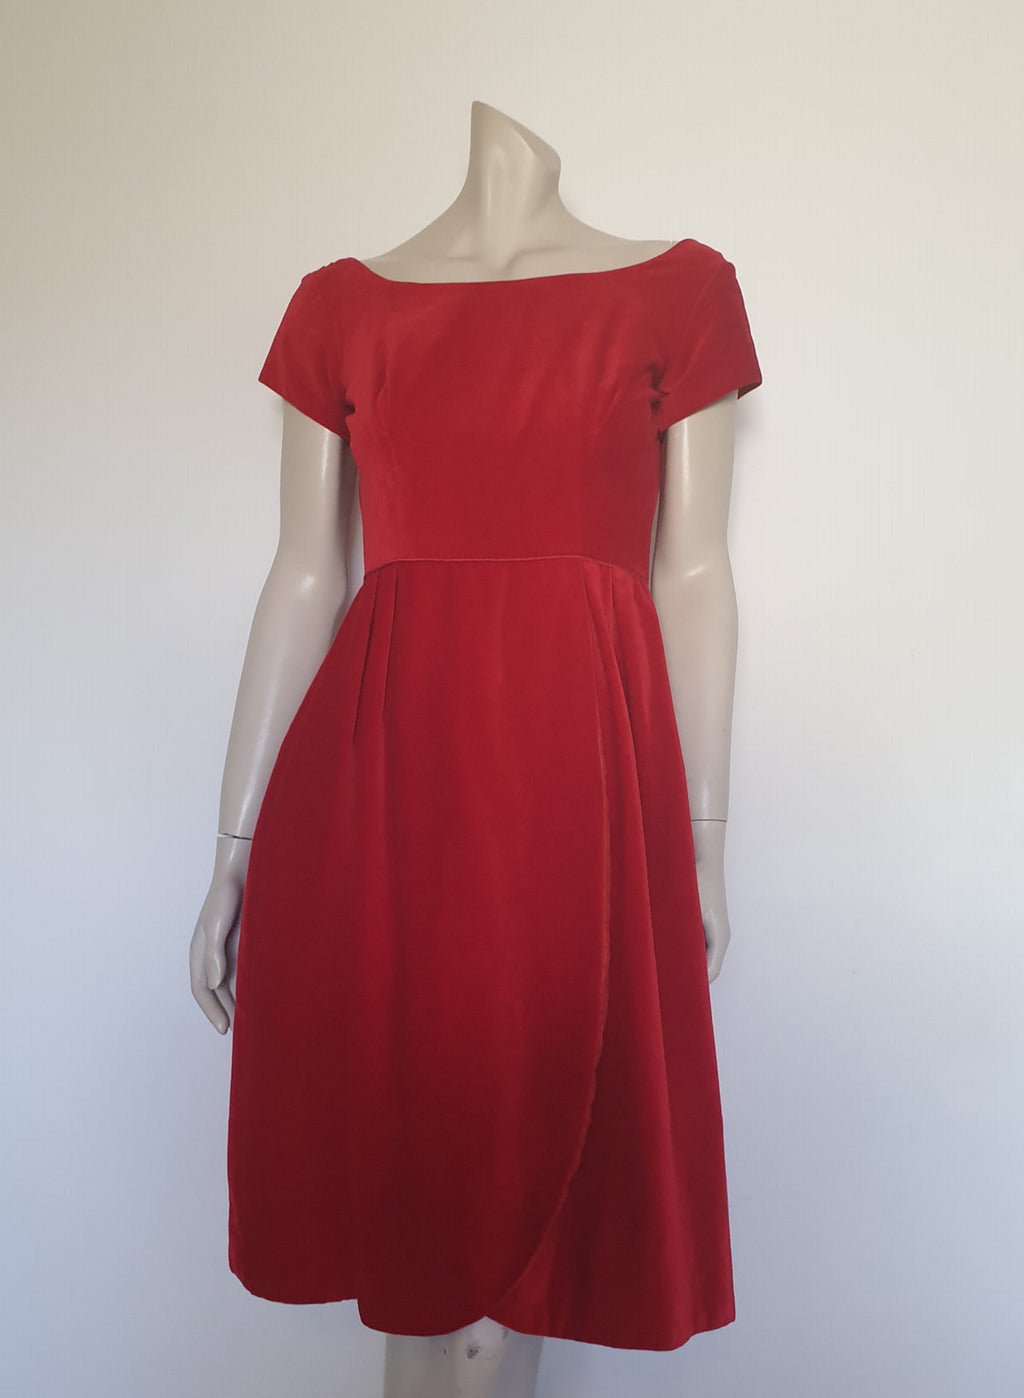 1960s vintage red velvet dress by belvera fashions small